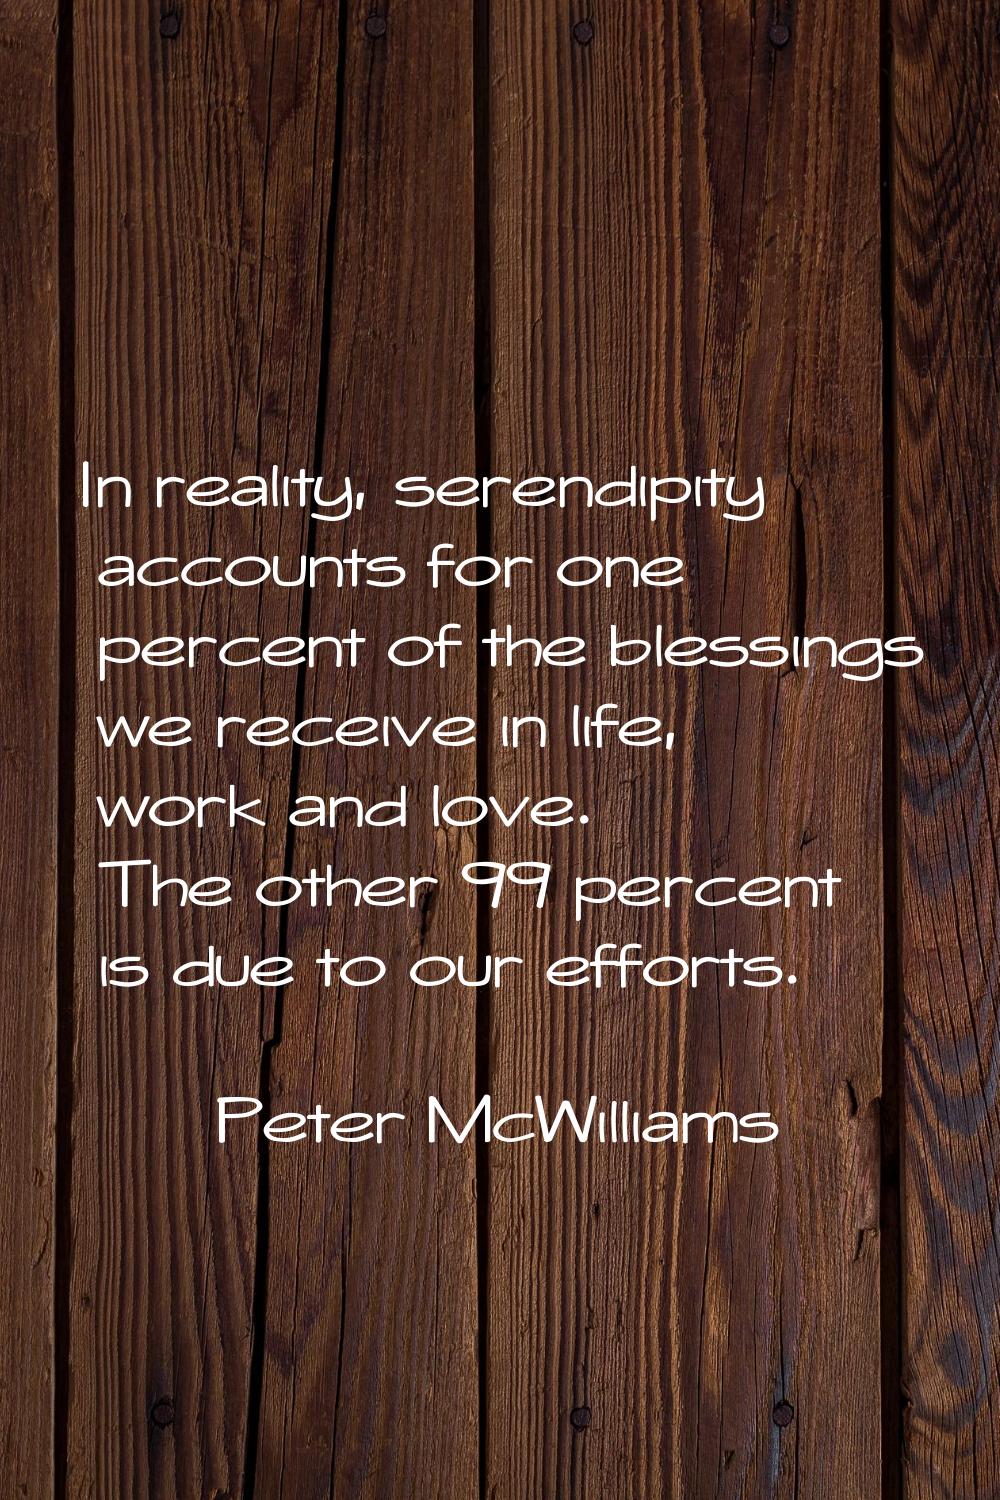 In reality, serendipity accounts for one percent of the blessings we receive in life, work and love